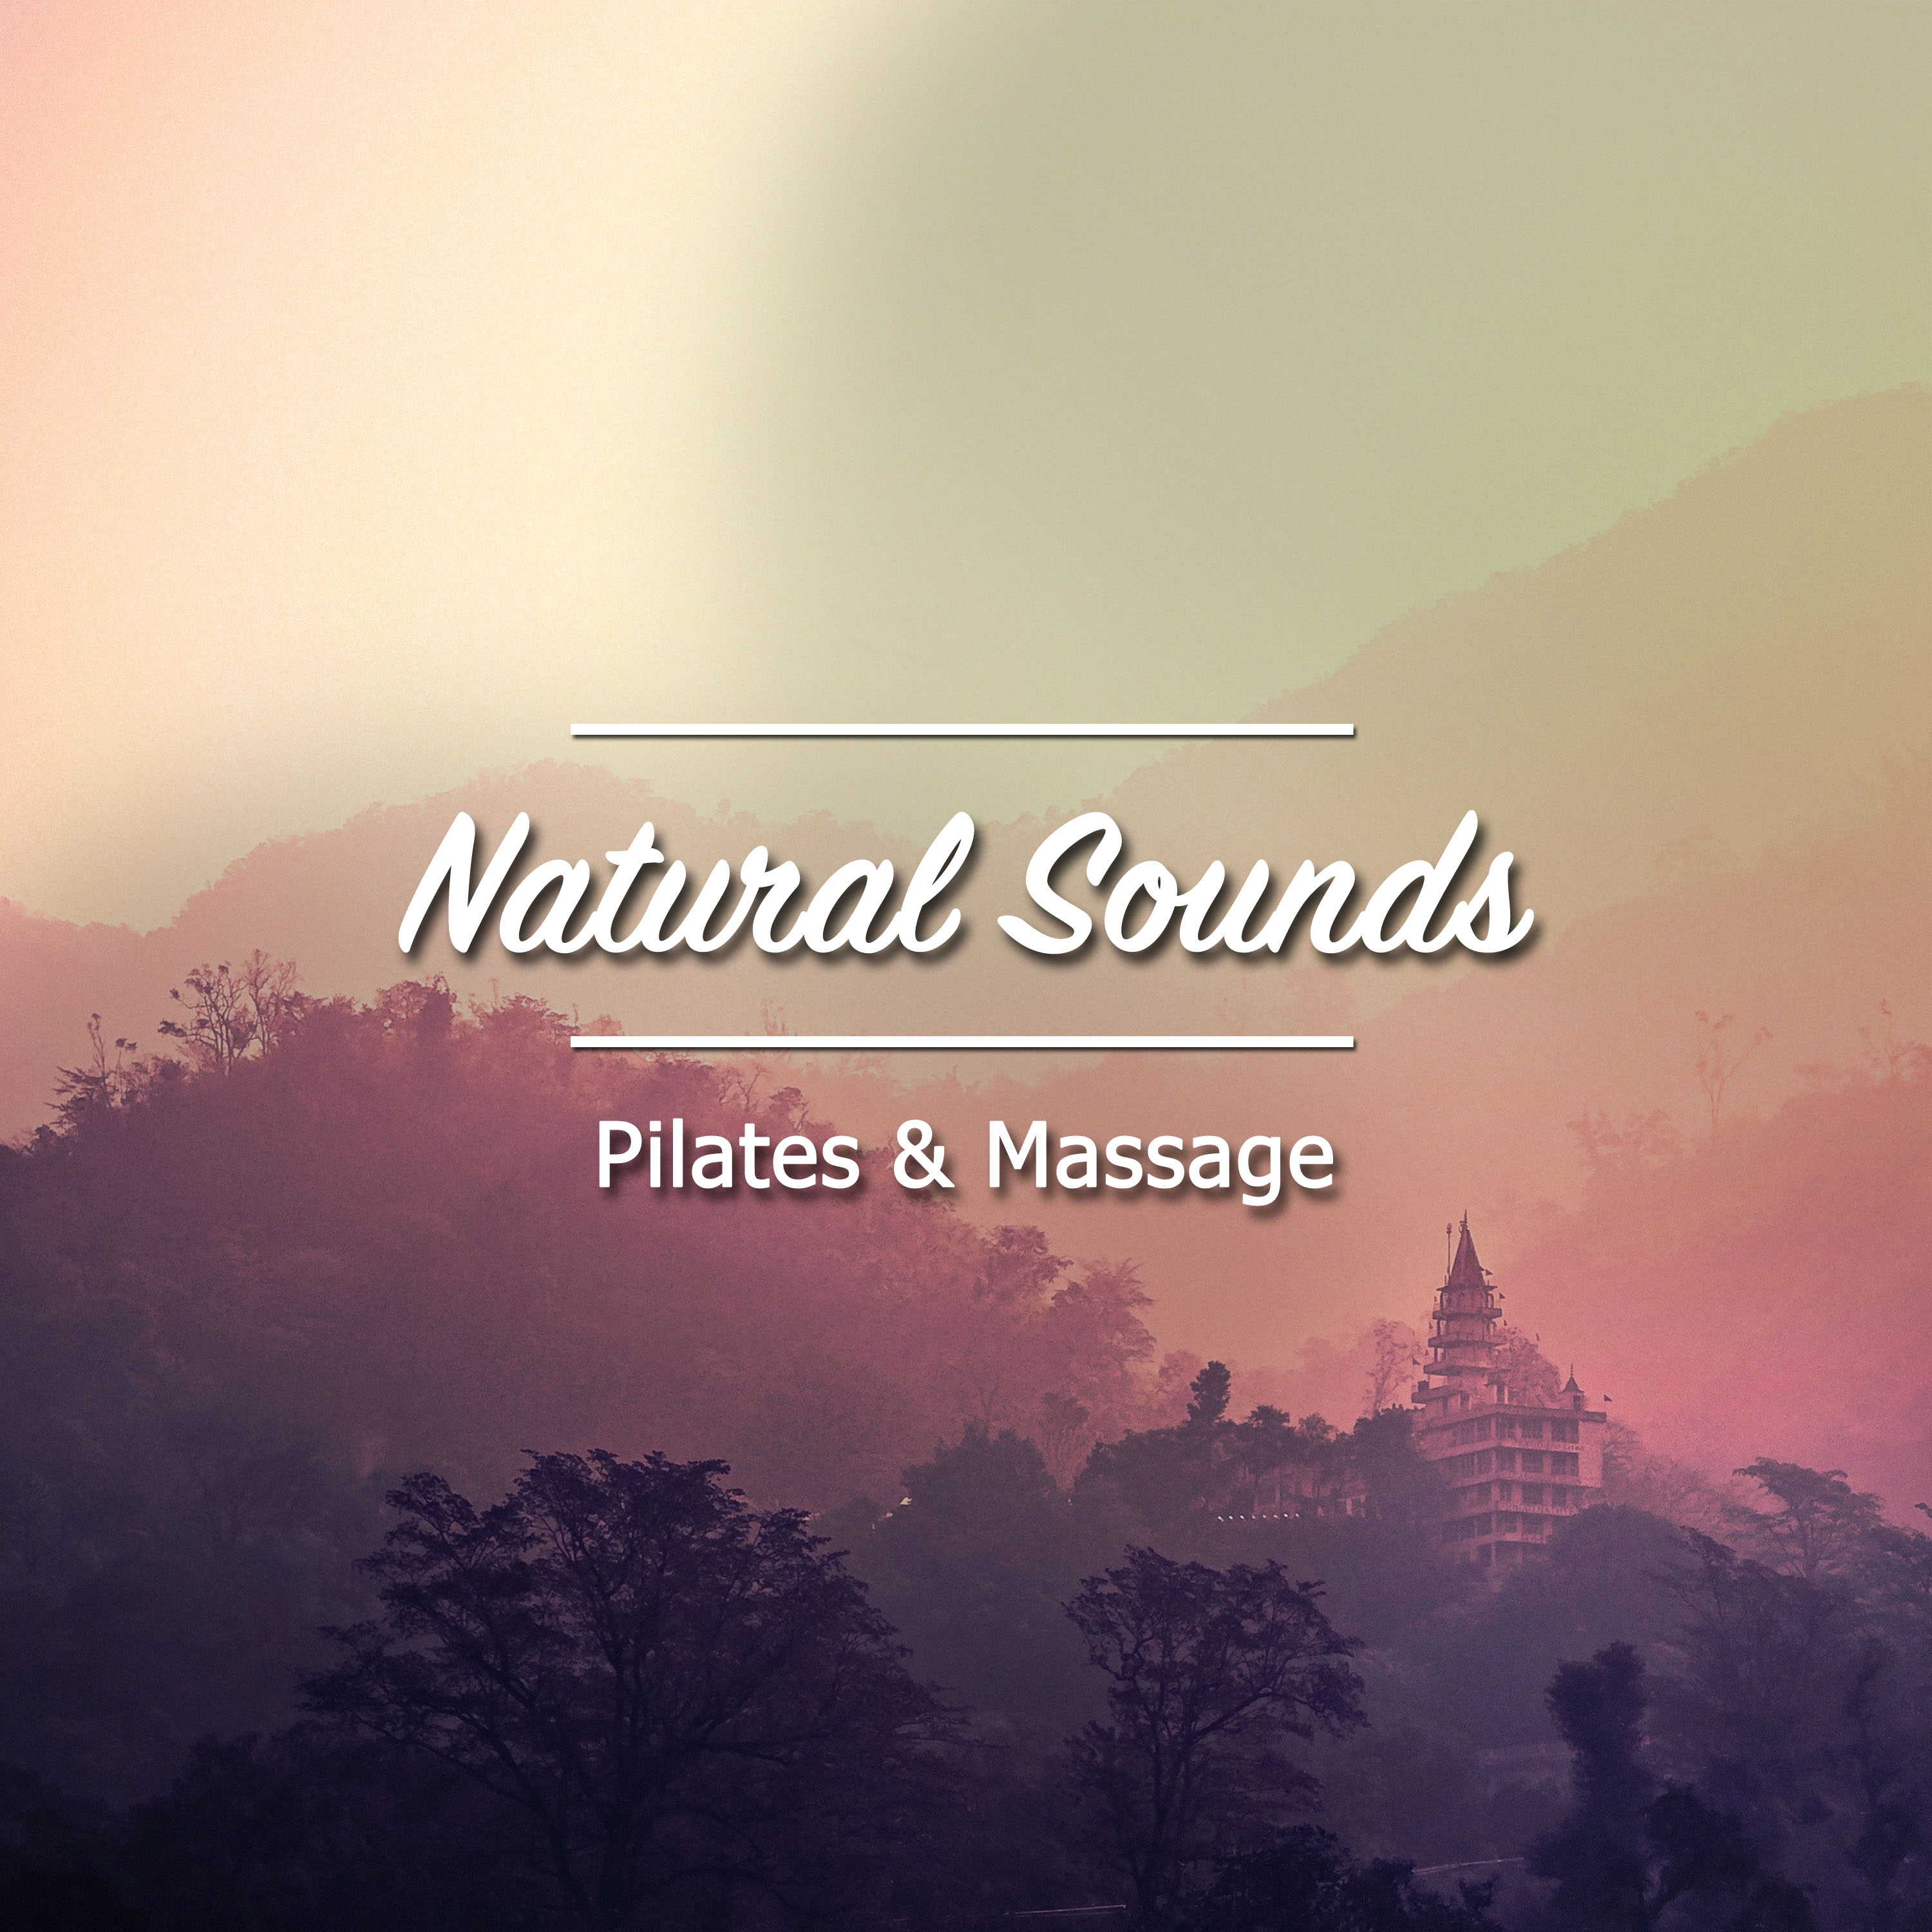 16 Natural Sounds for Pilates and Massage